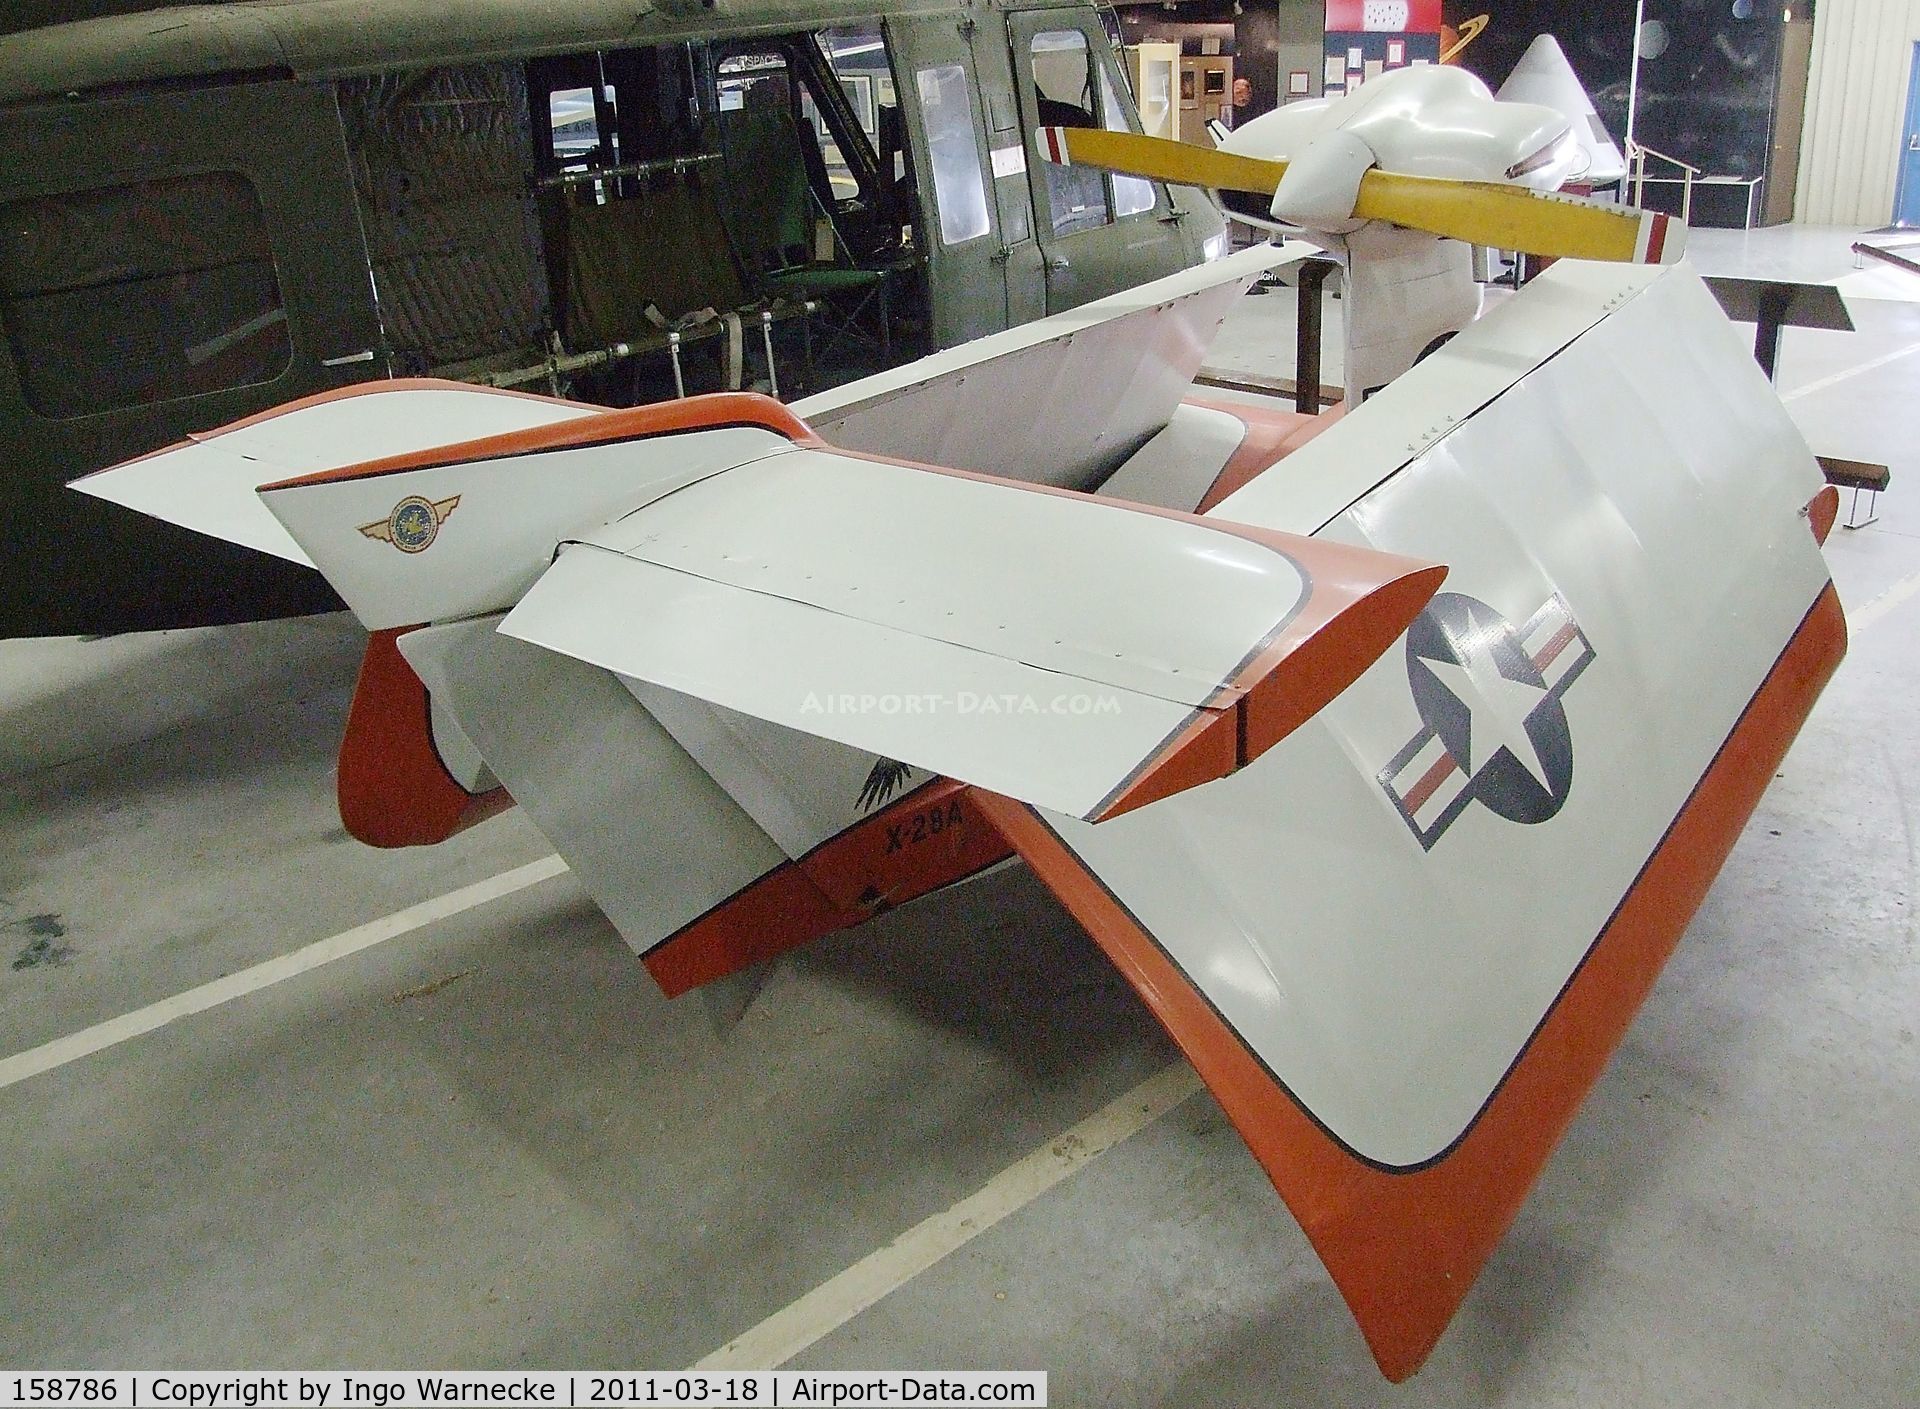 158786, 1970 Pereira X-28A C/N Not found 158786, Pereira X-28A Osprey at the Mid-America Air Museum, Liberal KS